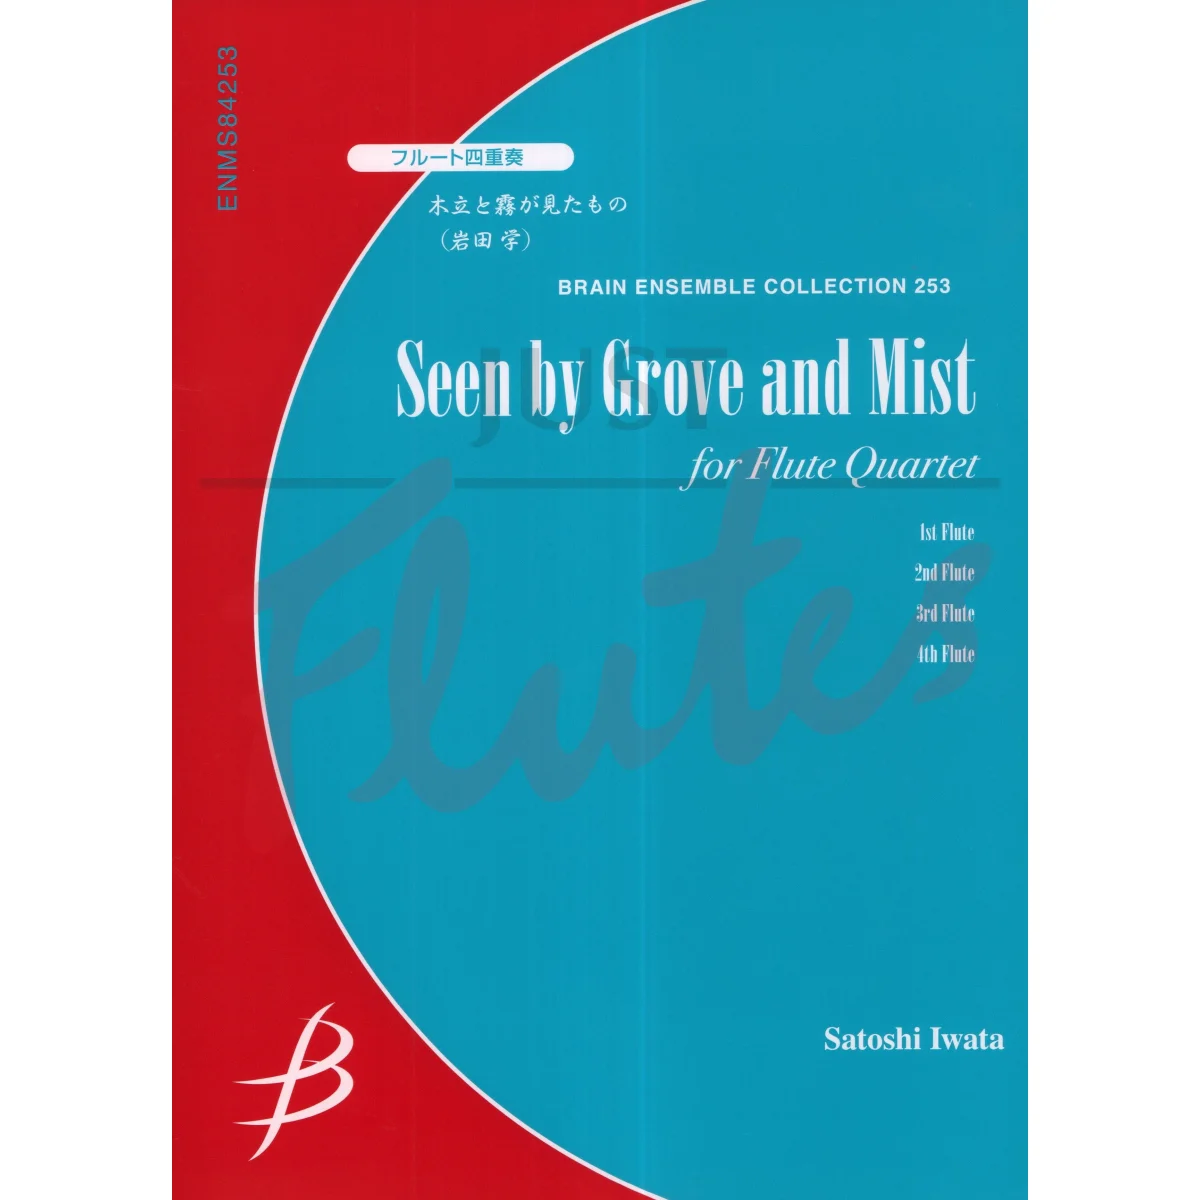 Seen by Grove and Mist for Flute Quartet